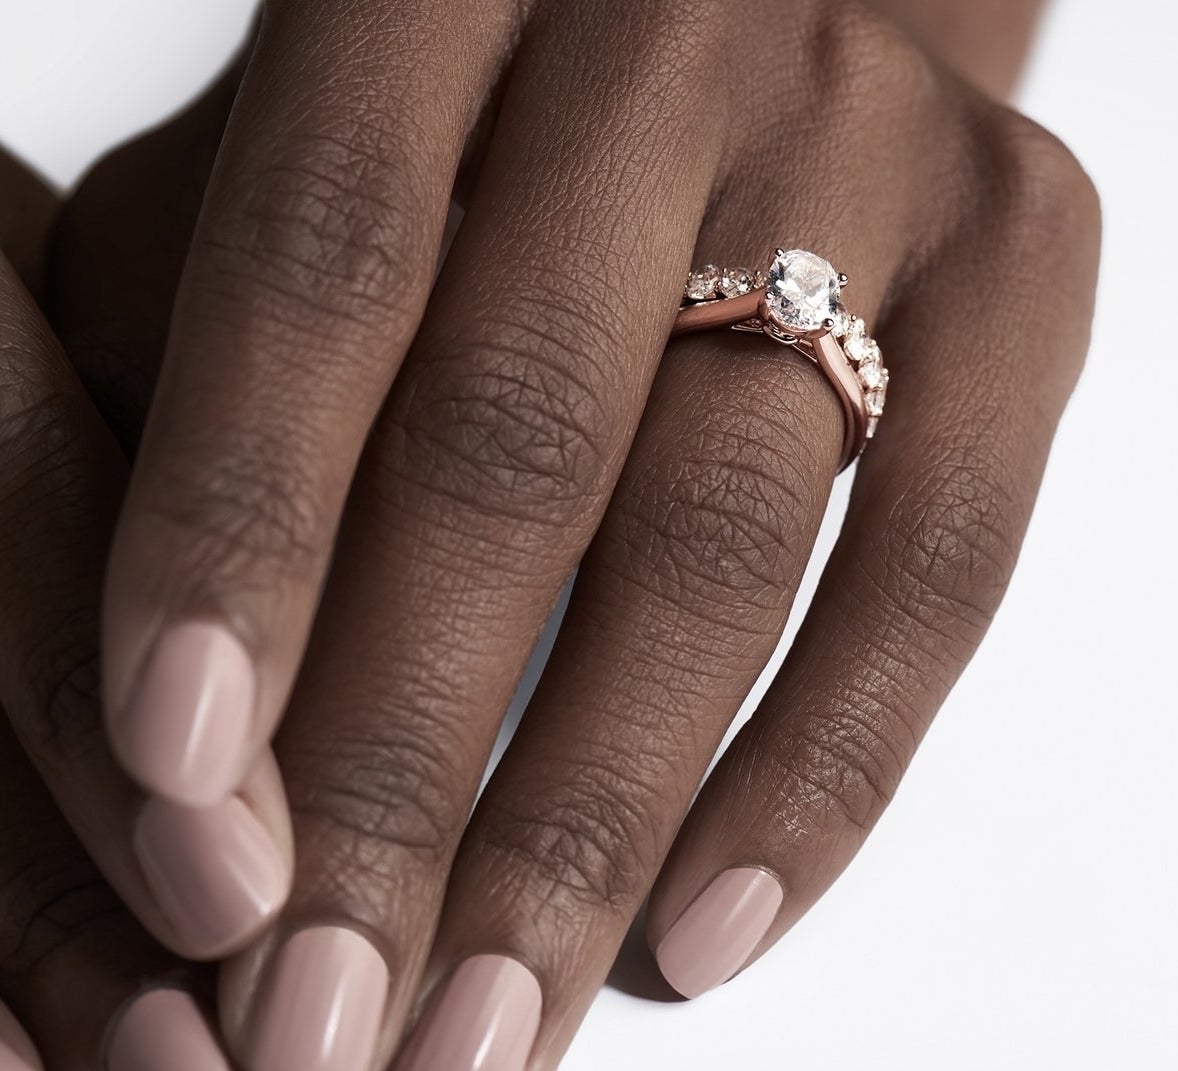 model wearing the diamond ring with rose gold band